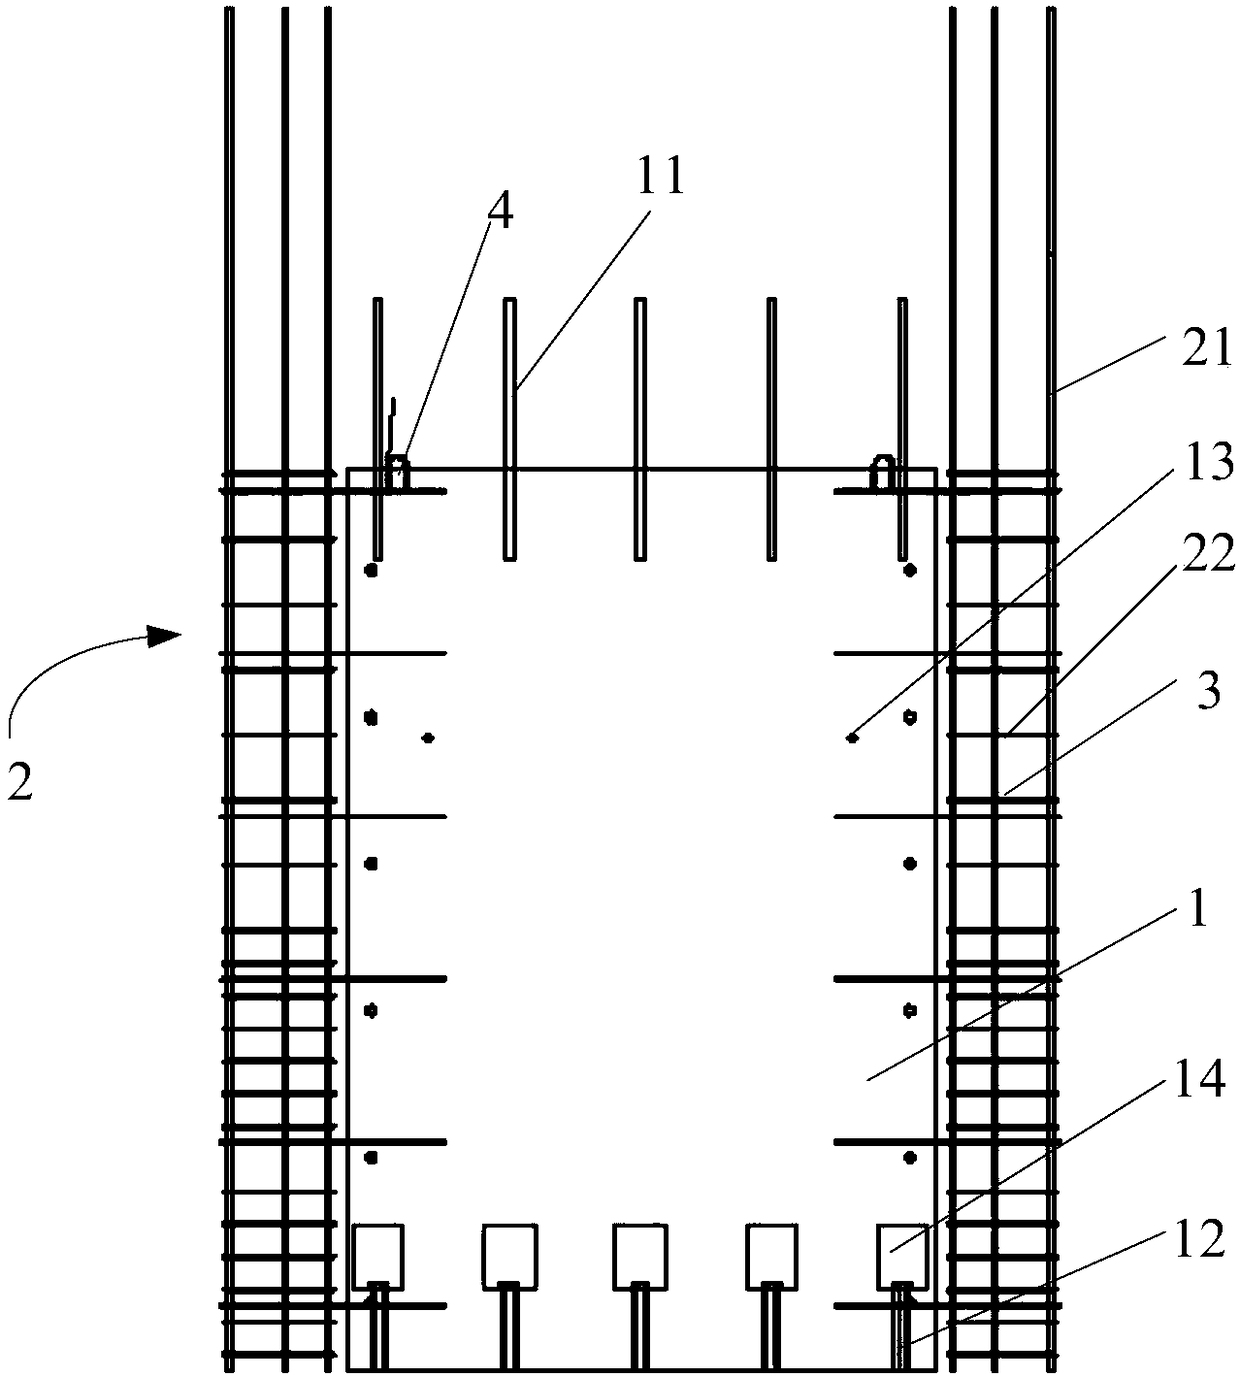 A prefabricated concrete shear wall component and its construction method